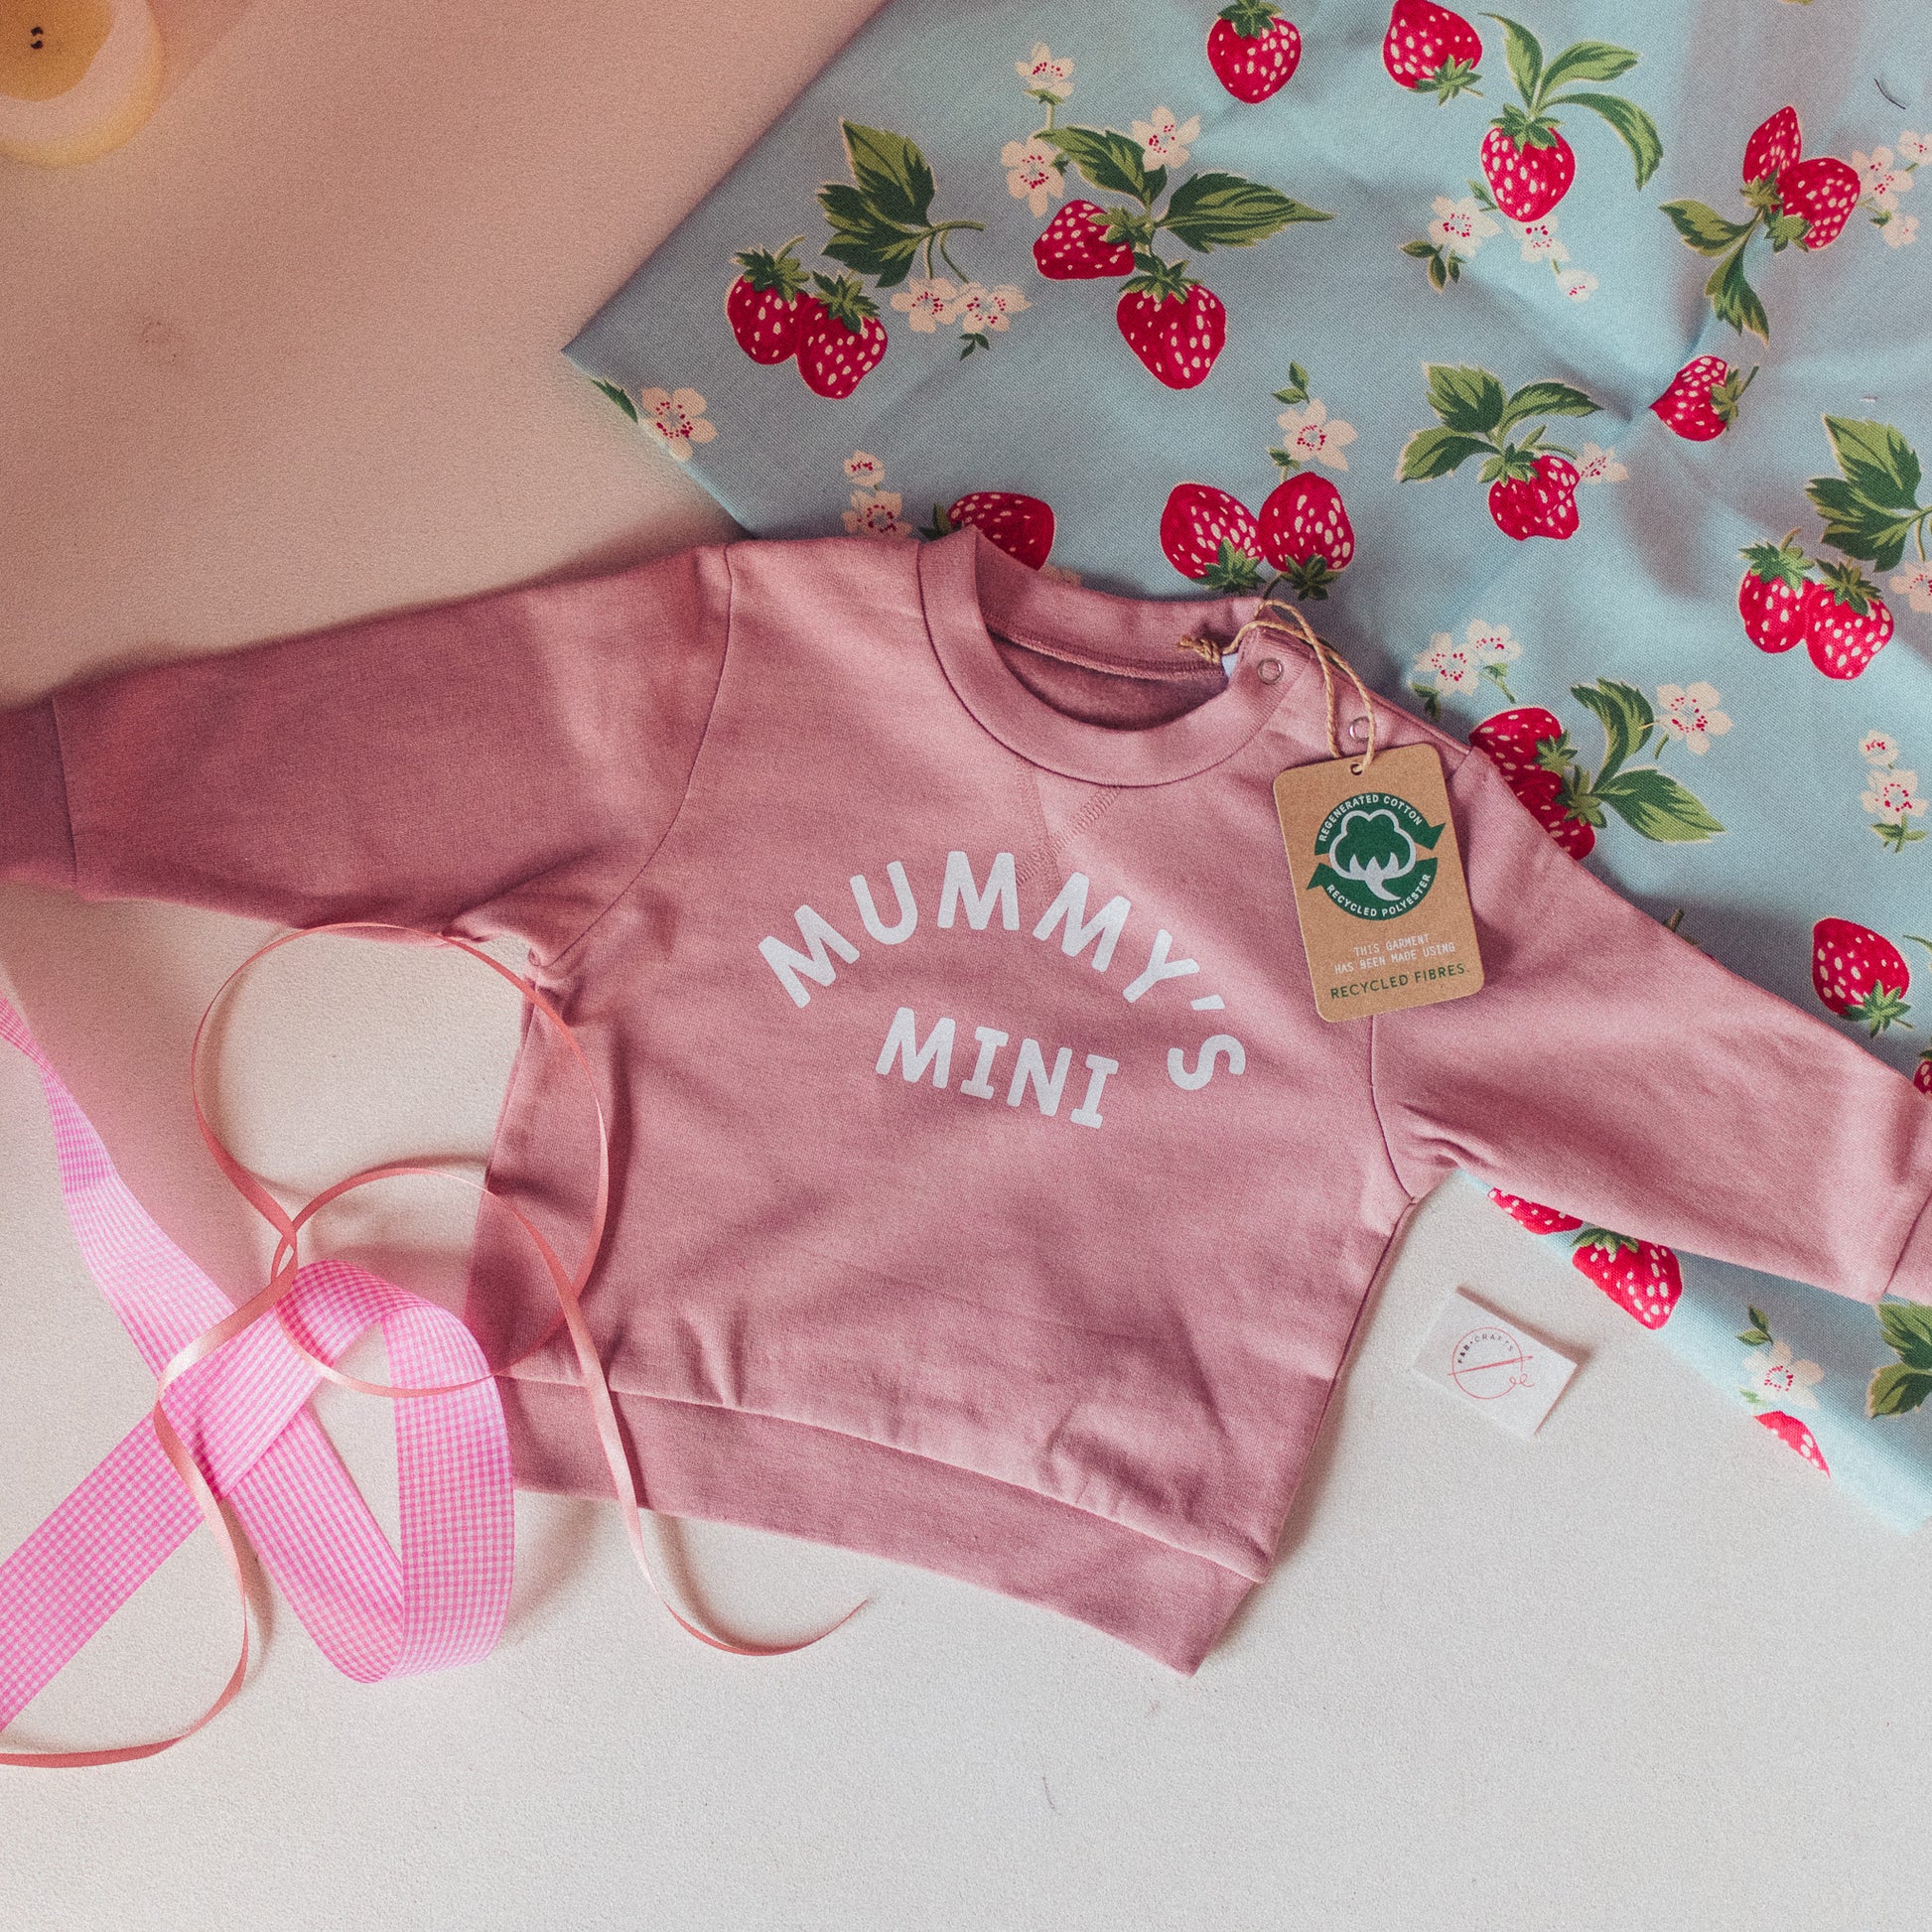 View of a charming pink children's sweatshirt with a sweet 'Mummy's Mini' design.